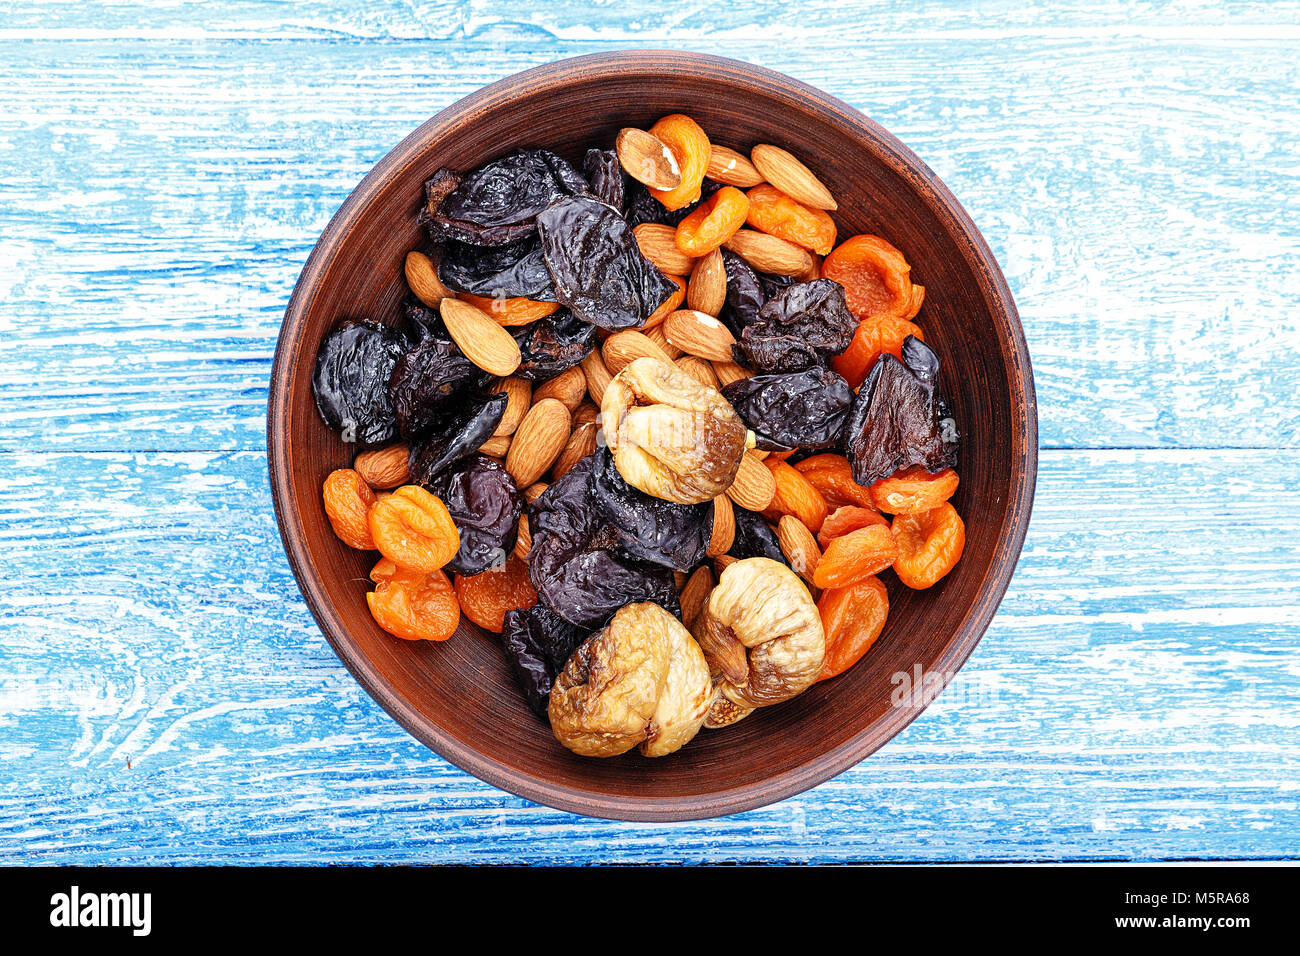 https://c8.alamy.com/comp/M5RA68/dried-figs-dried-apricots-and-prunes-in-a-mix-with-almonds-in-a-clay-M5RA68.jpg